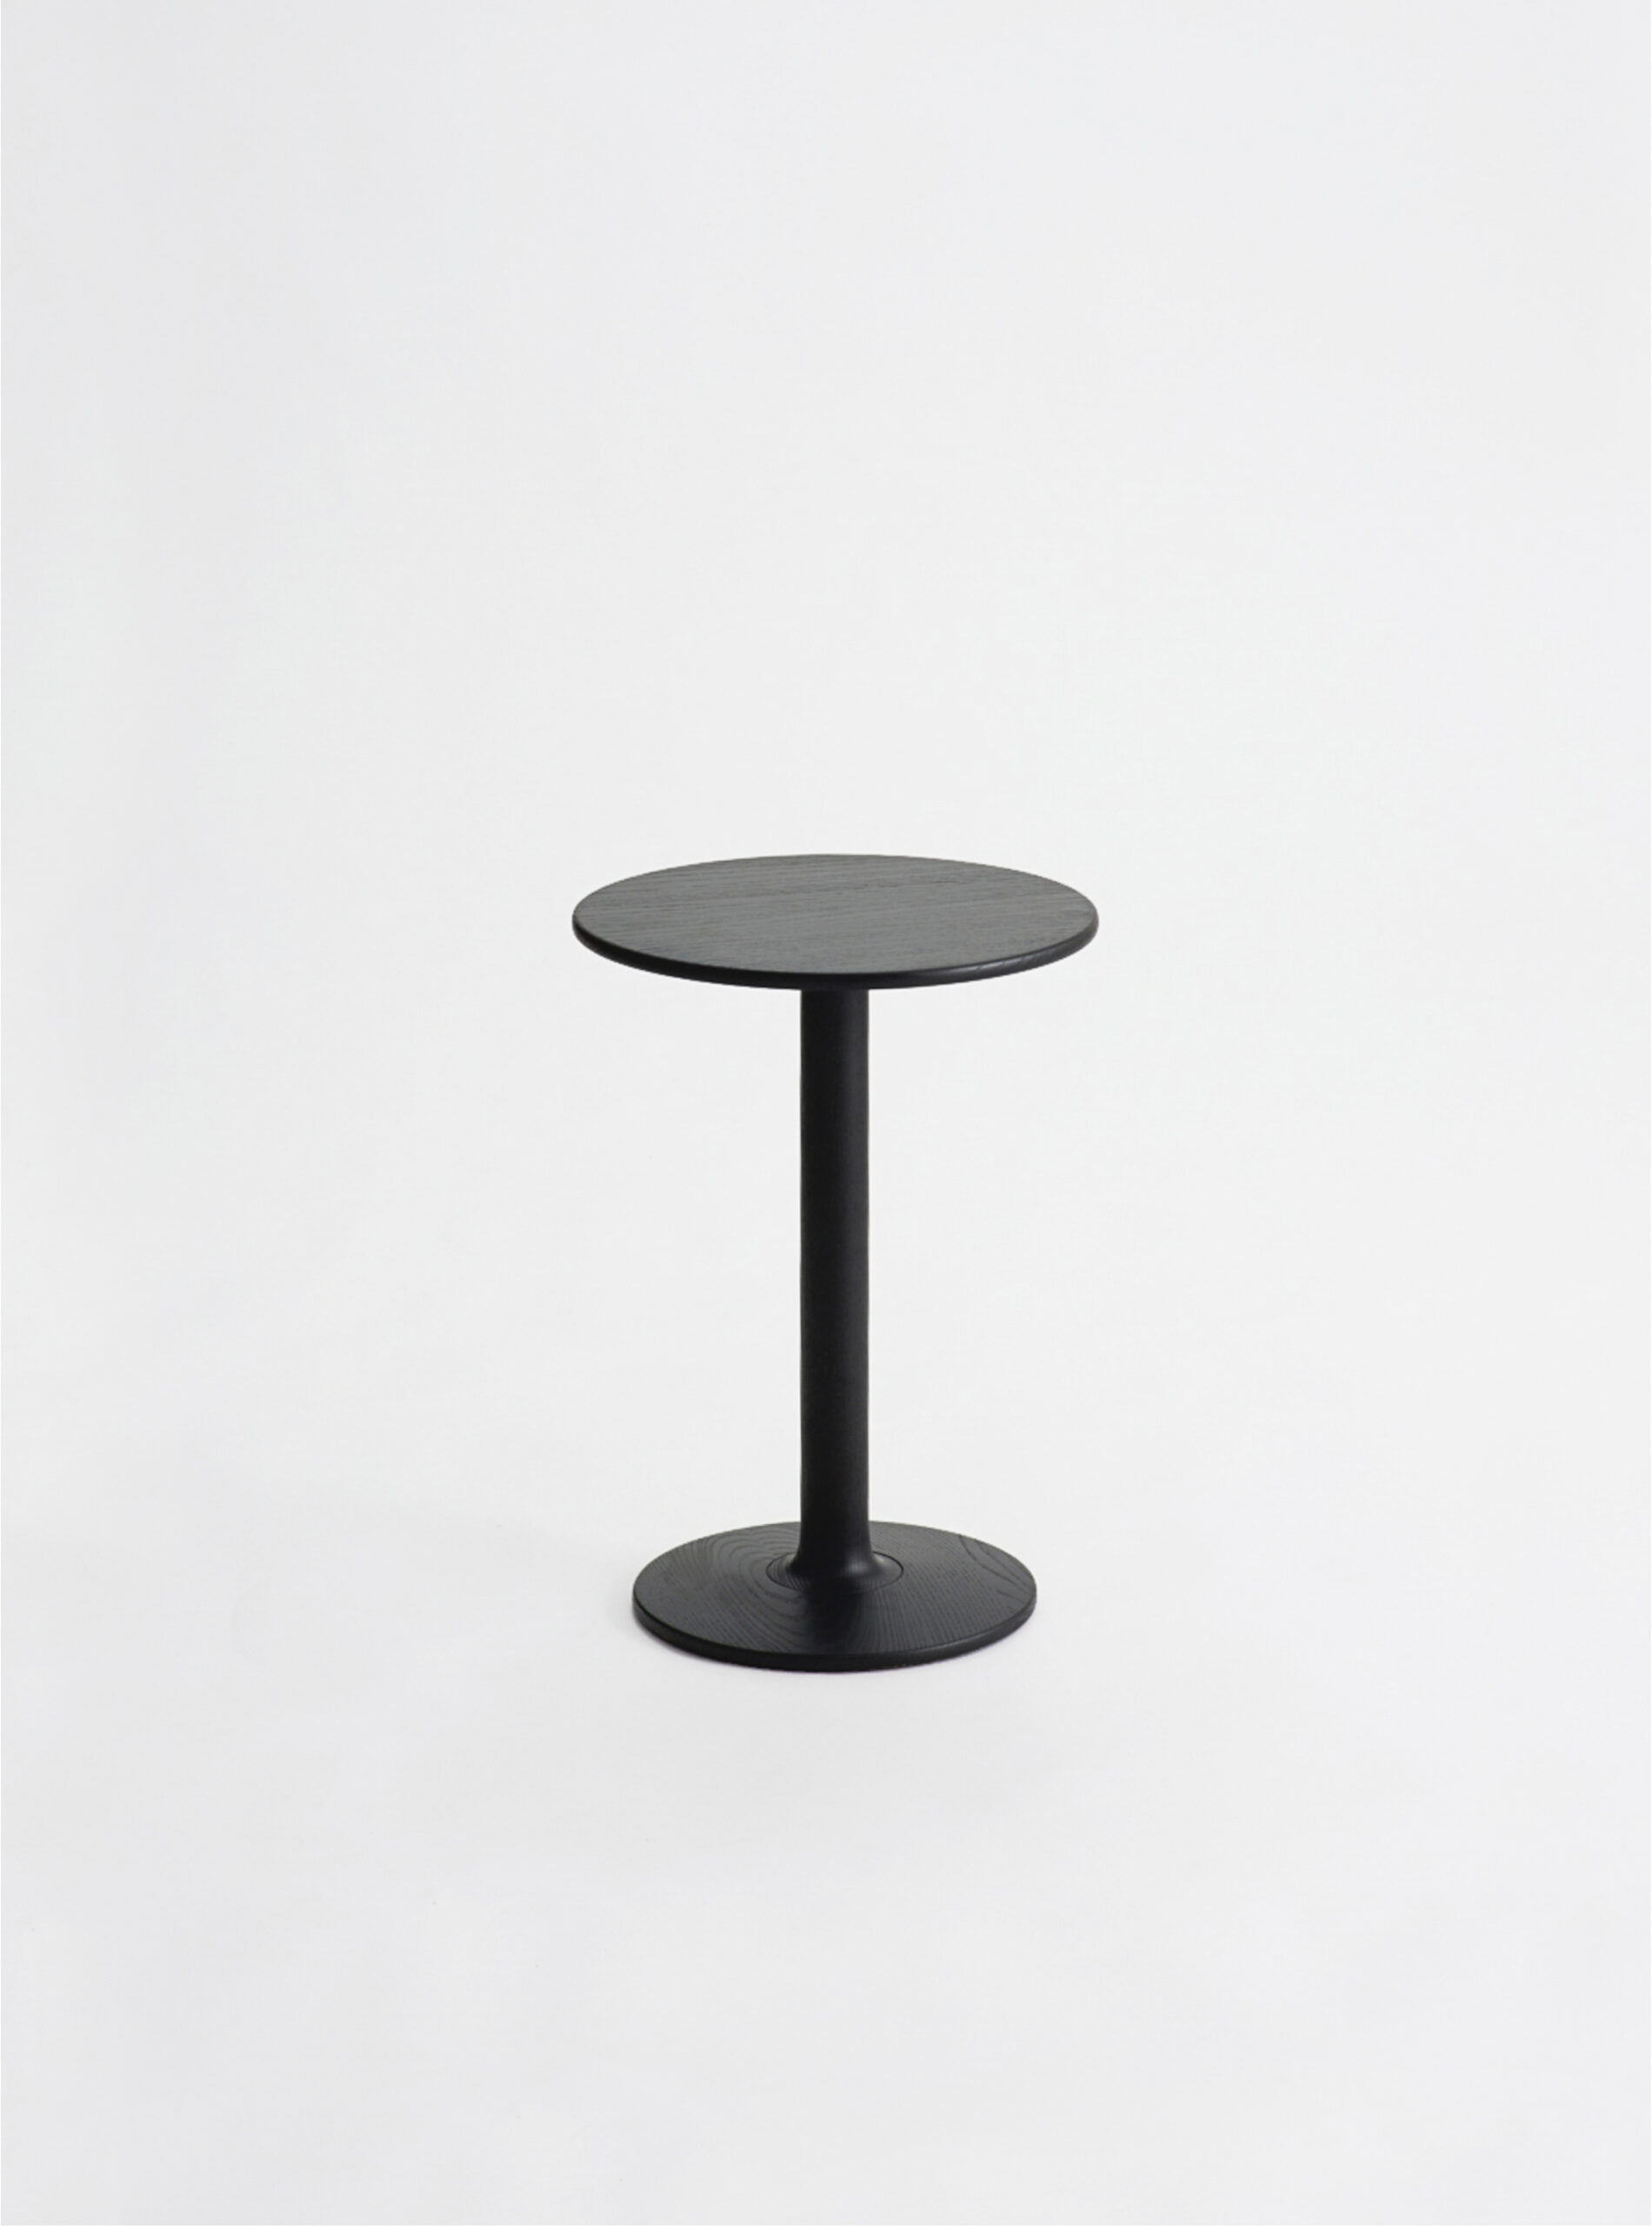 Taio side table & Voll Les furniture